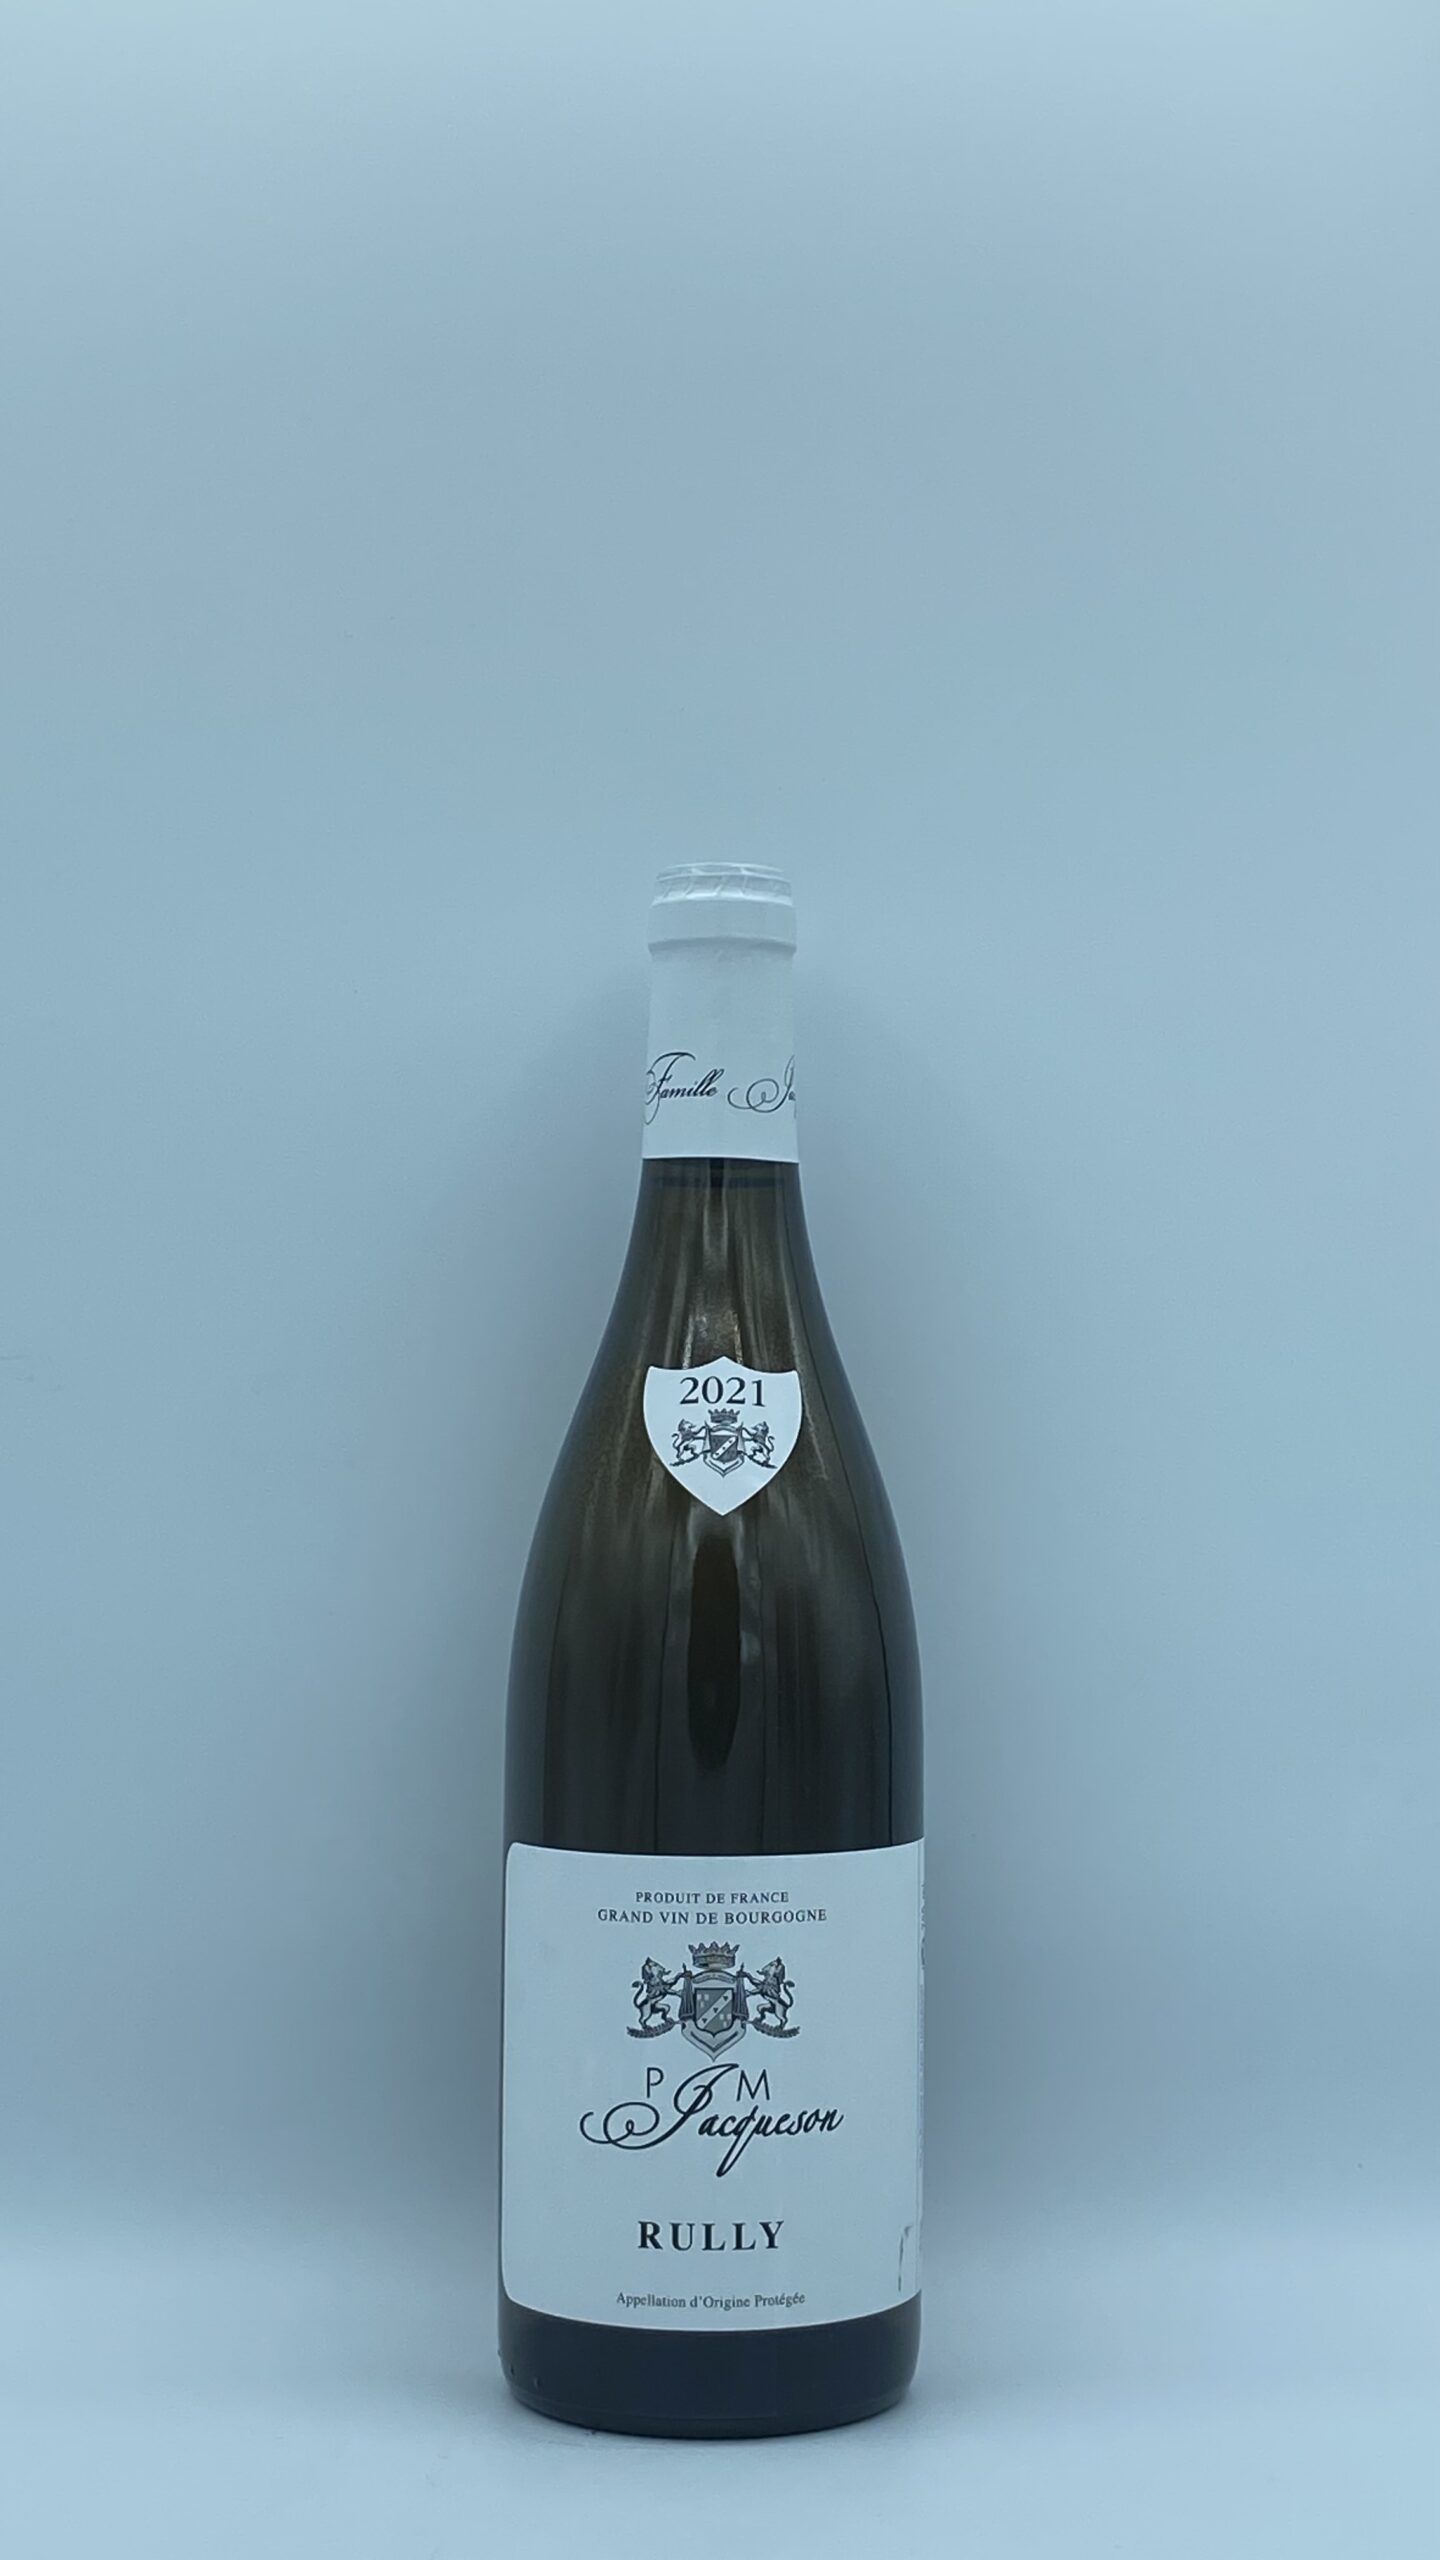 Bourgogne Rully blanc 2021 Domaine Jacqueson